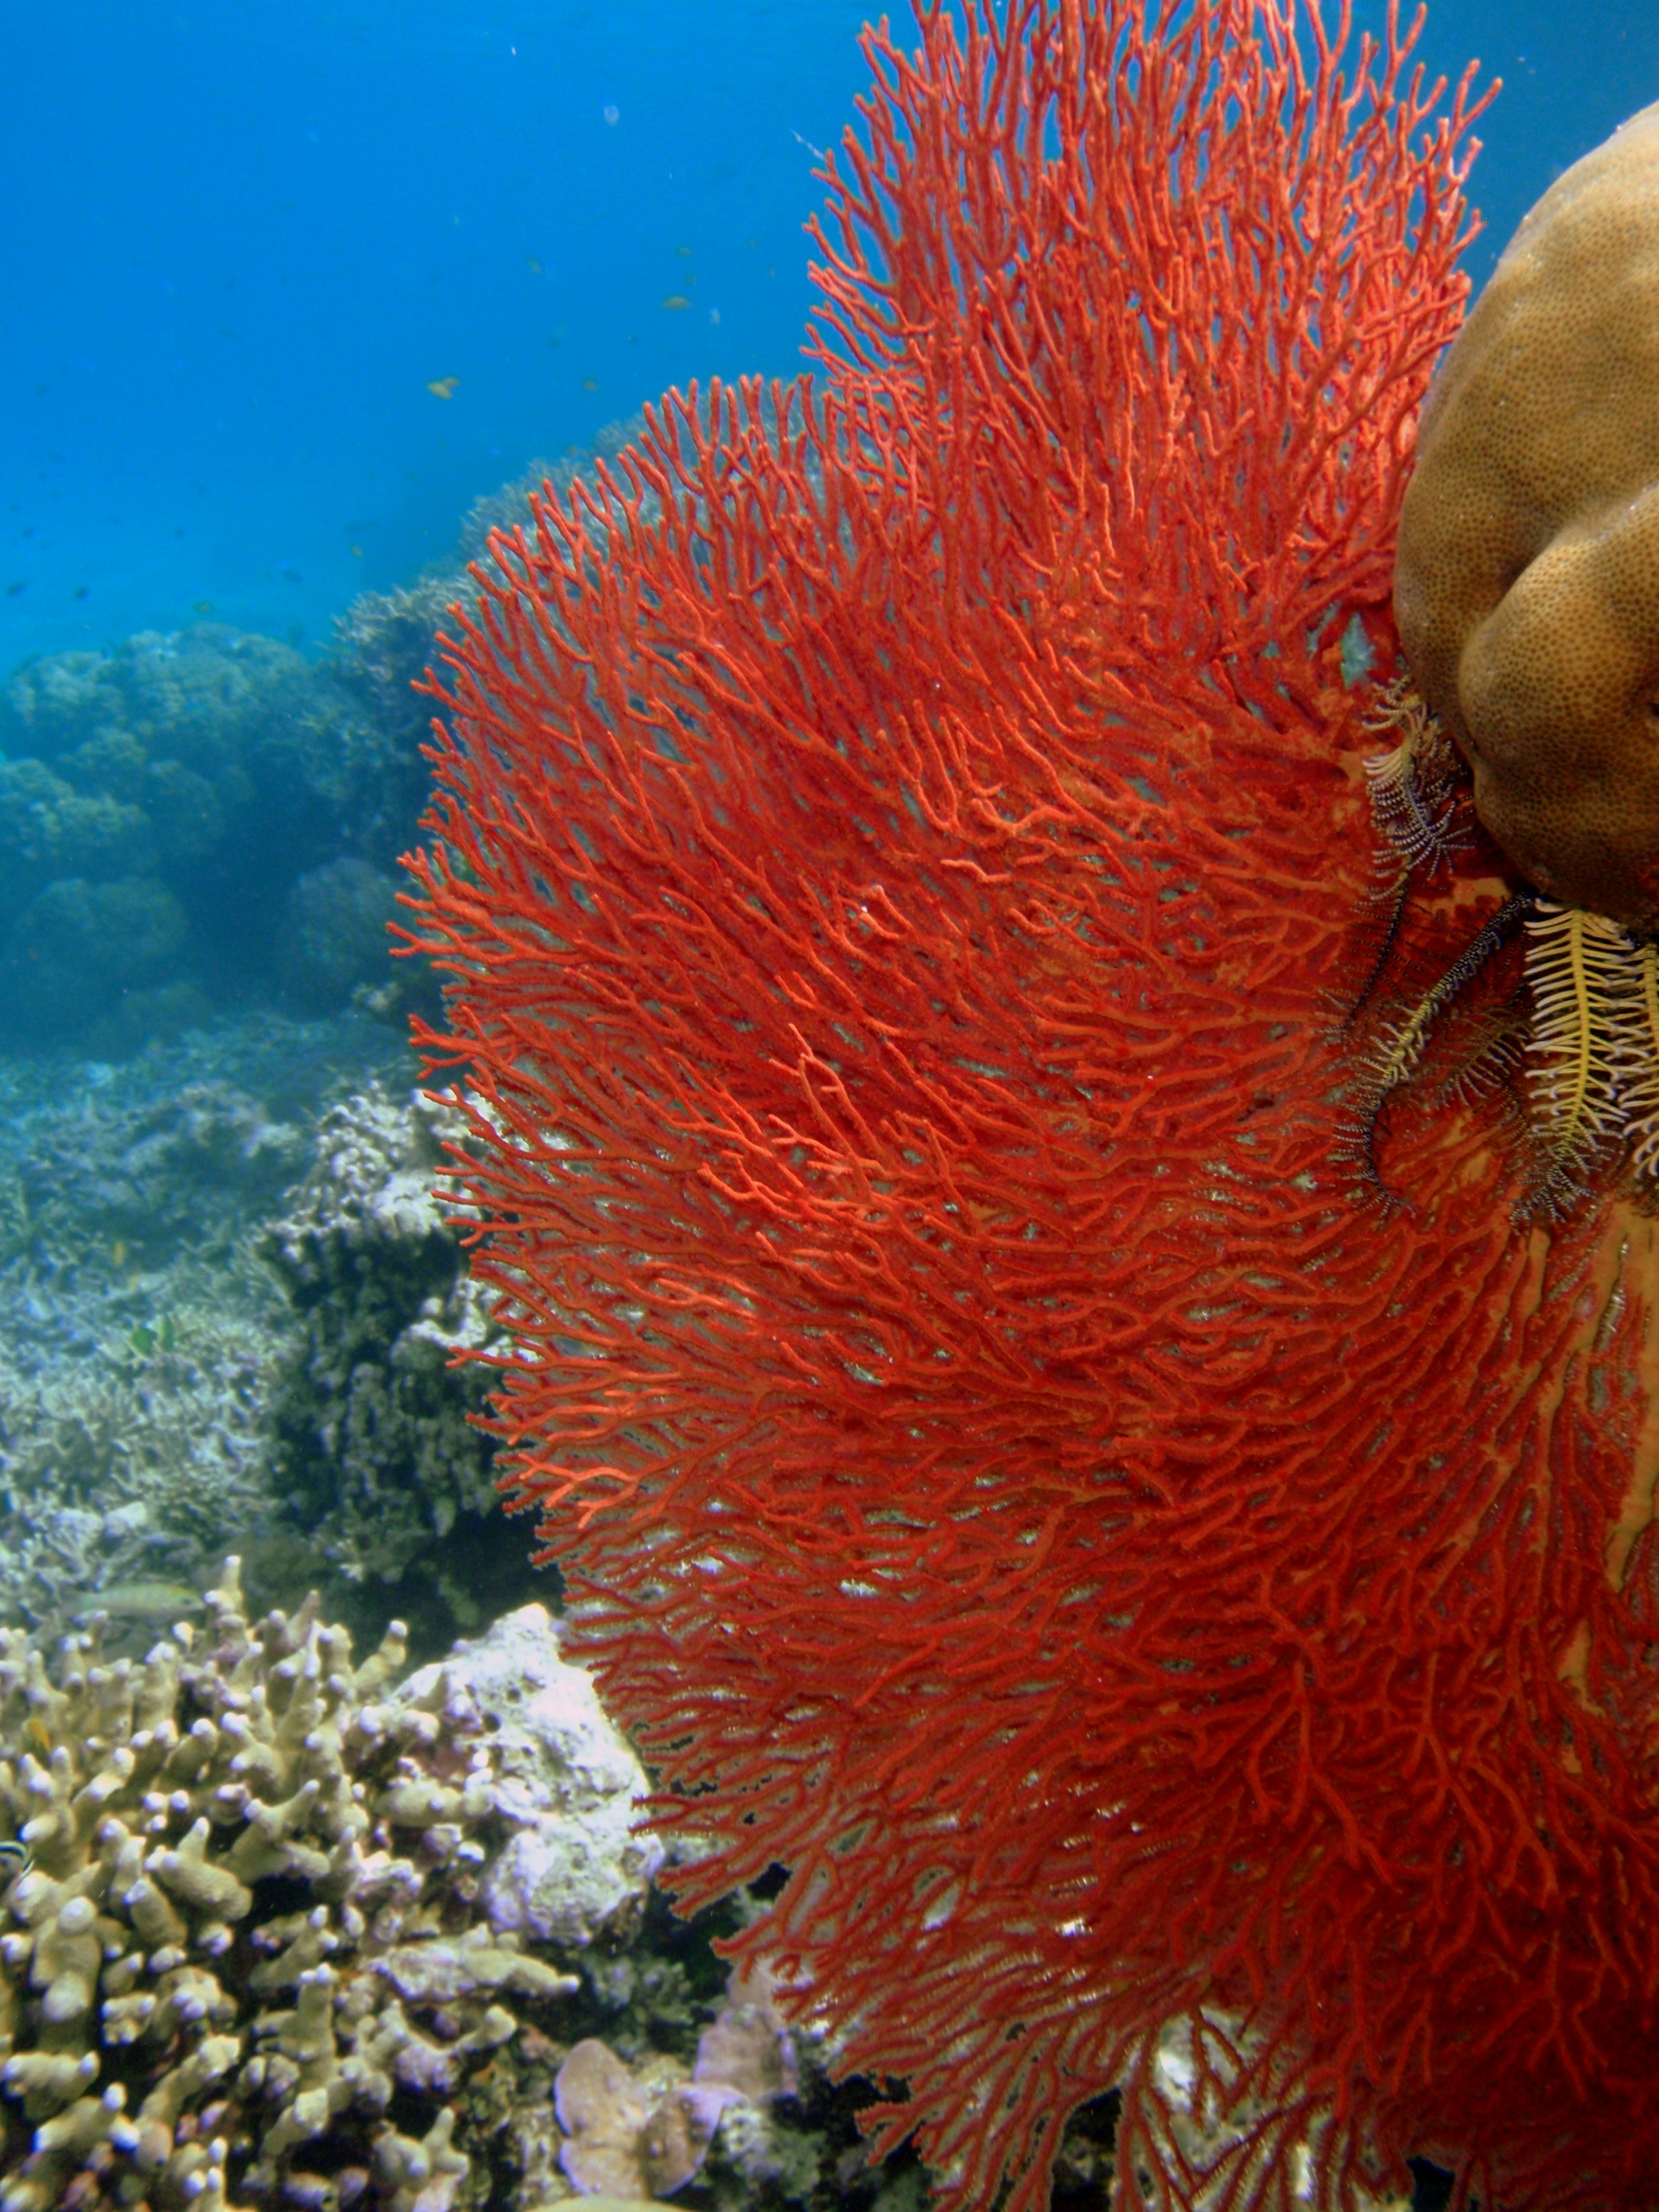 A bright red, delicate coral looks to sway in the current; in the background are more greenish corals and deep blue ocean.